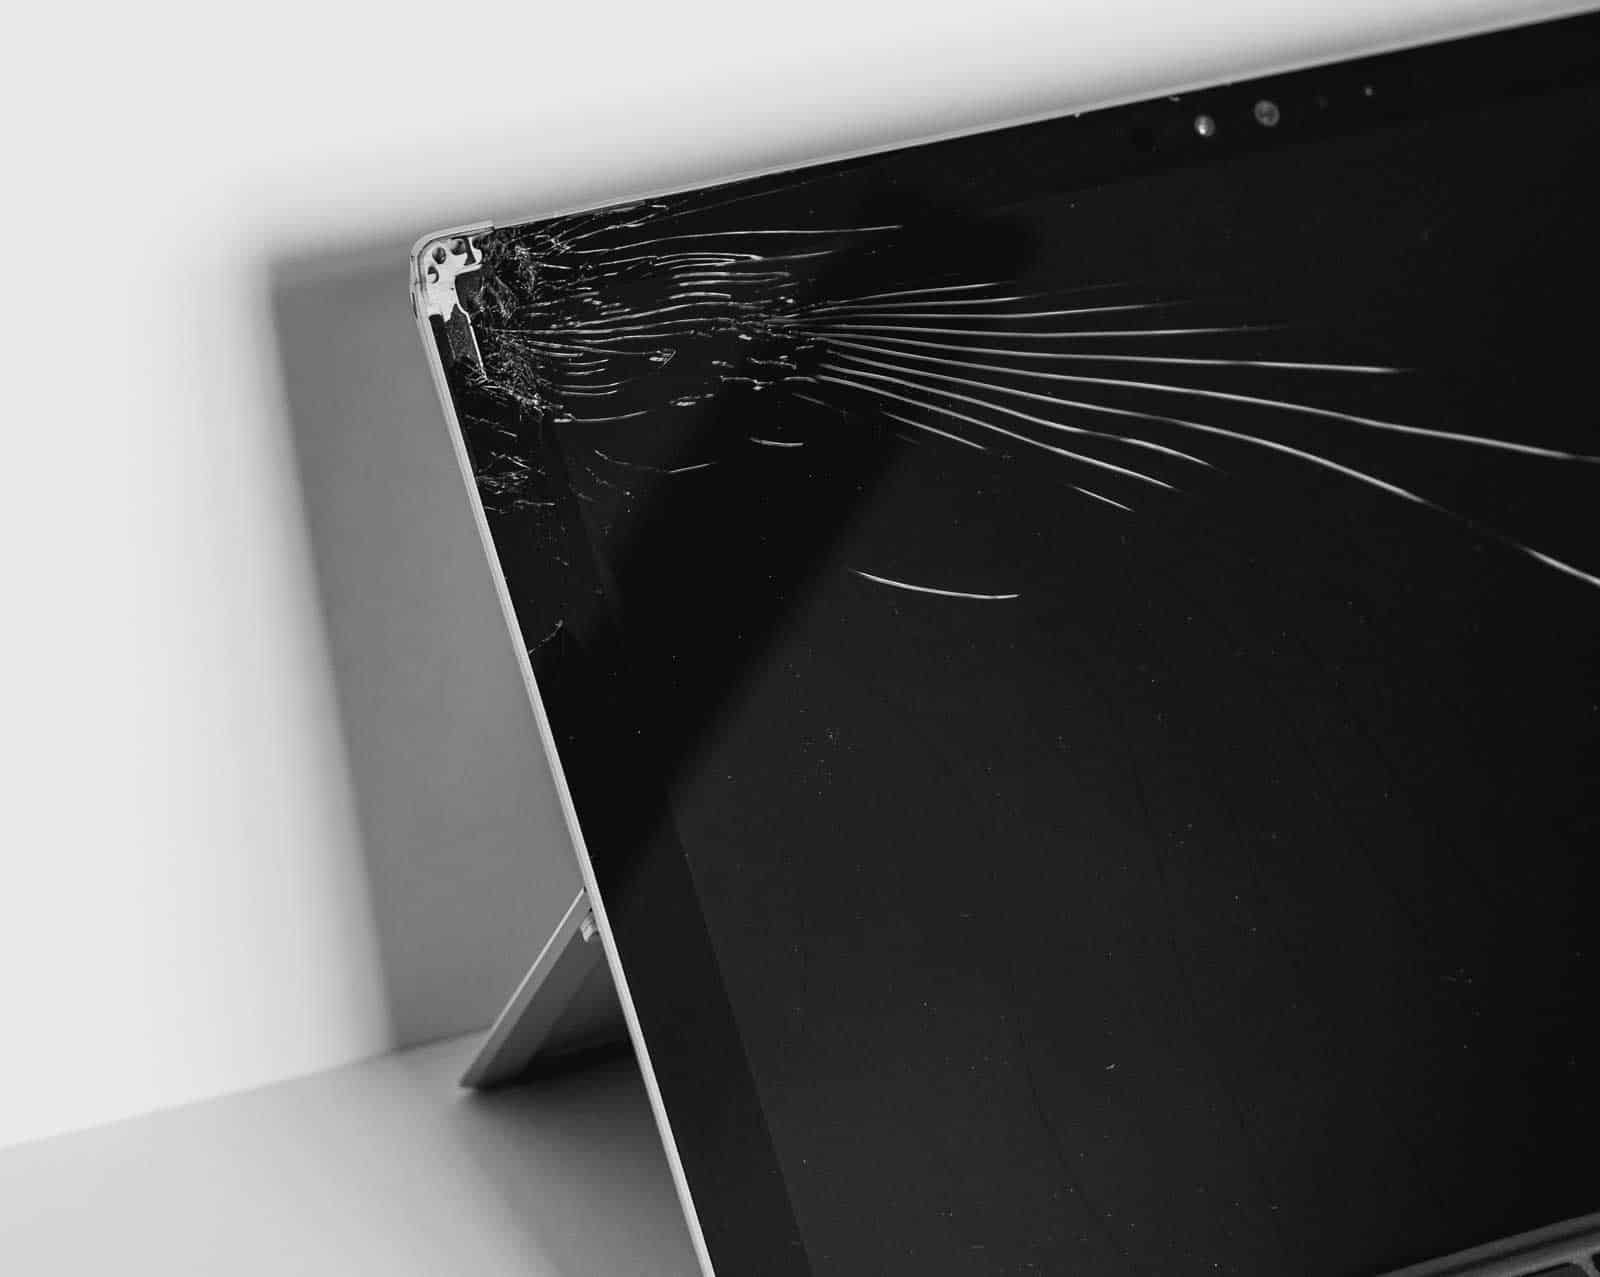 How much does laptop screen repair cost?